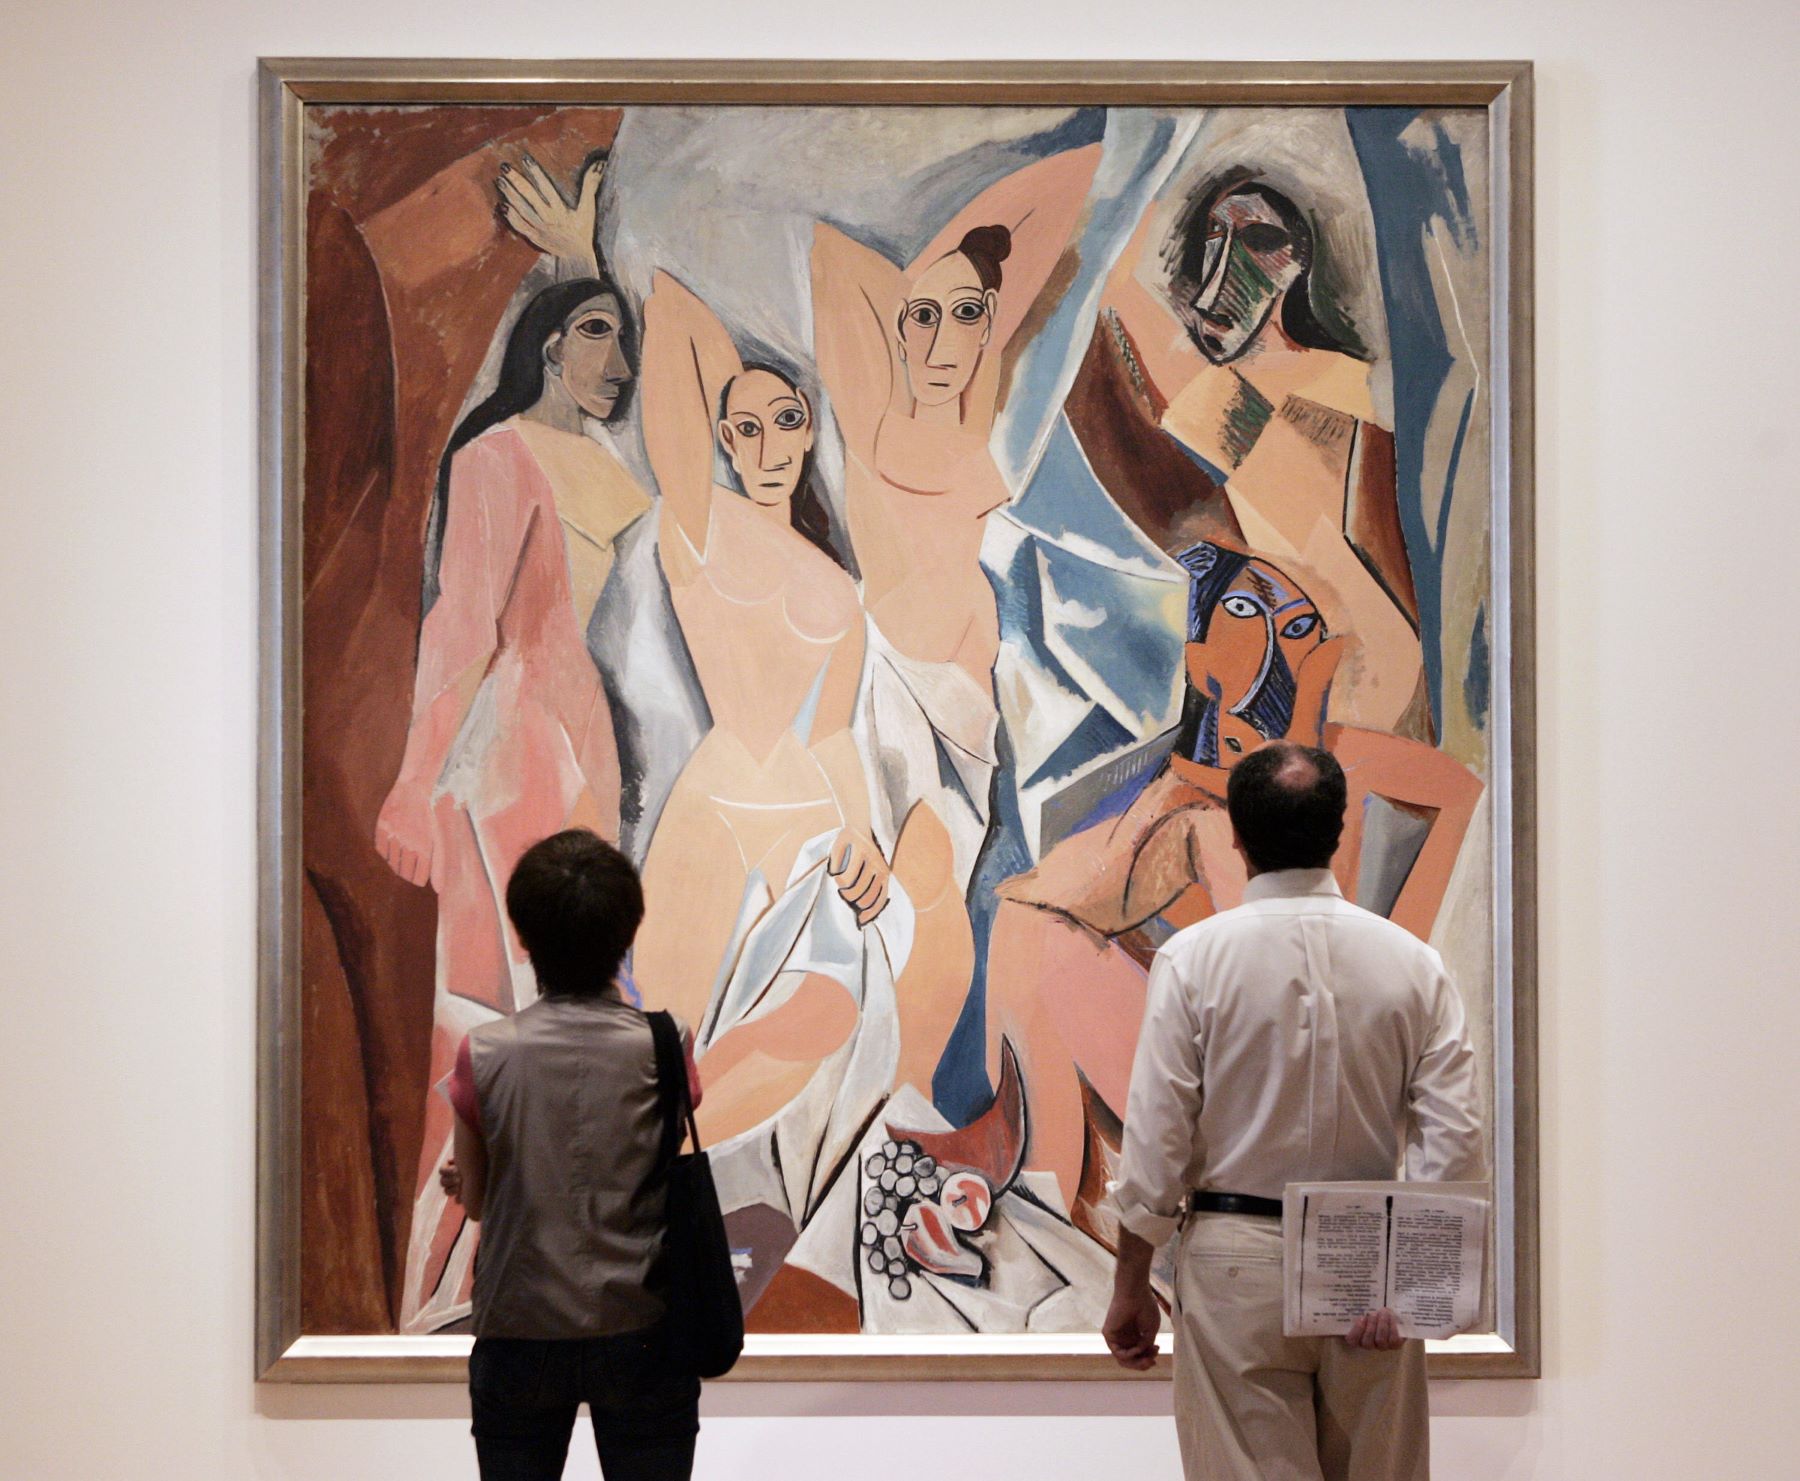 Pablo Picasso painting 'Les Demoiselles d'Avignon' which was argued to use in James Cameron's 'Titanic'